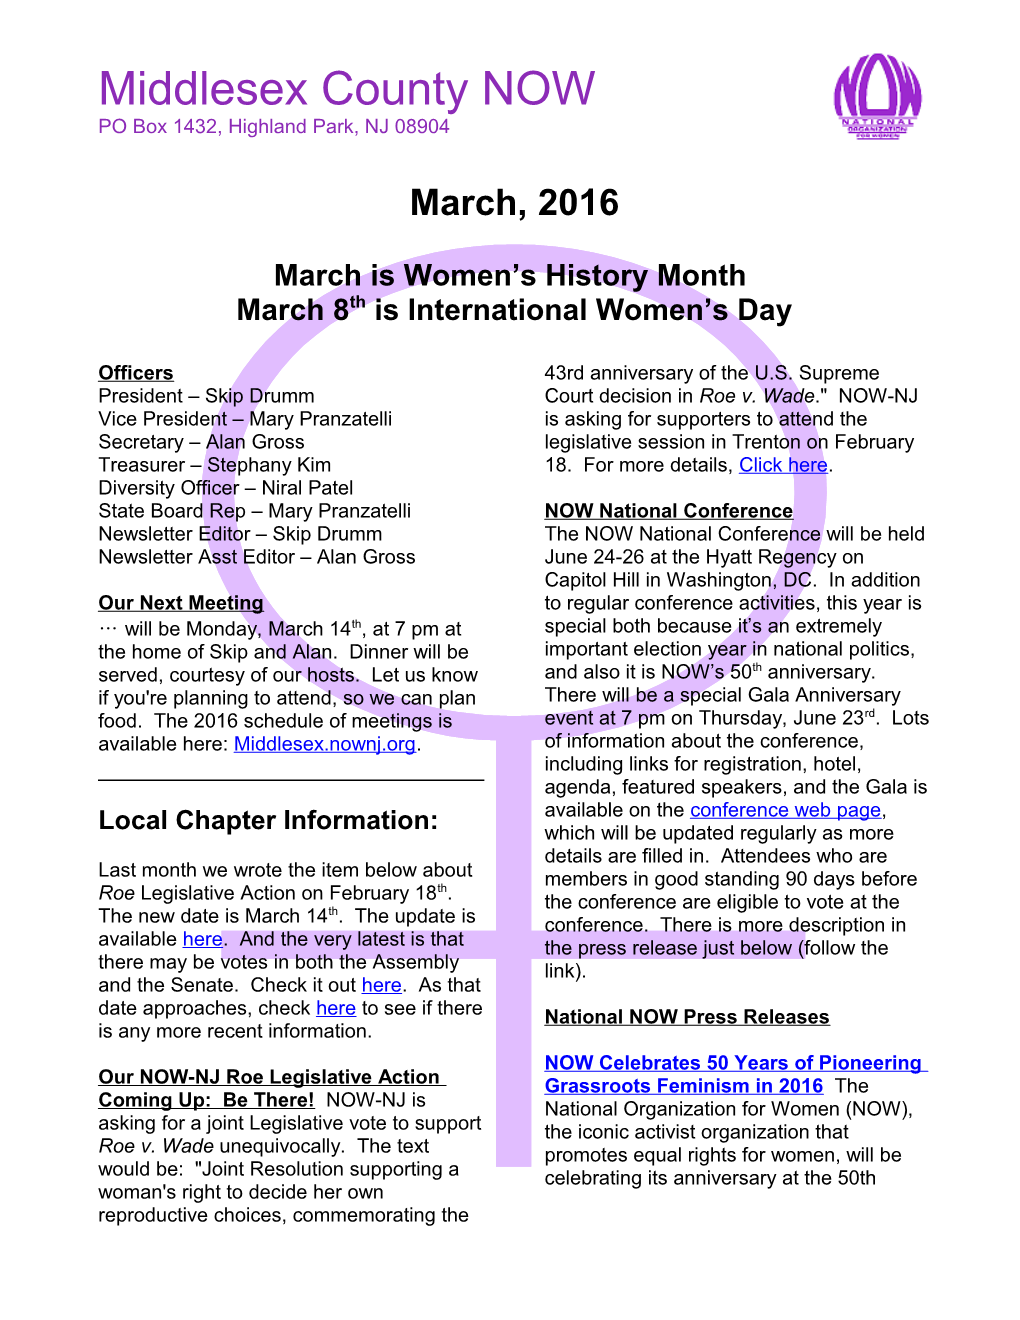 Middlesex County NOW Newsletter, March 2016